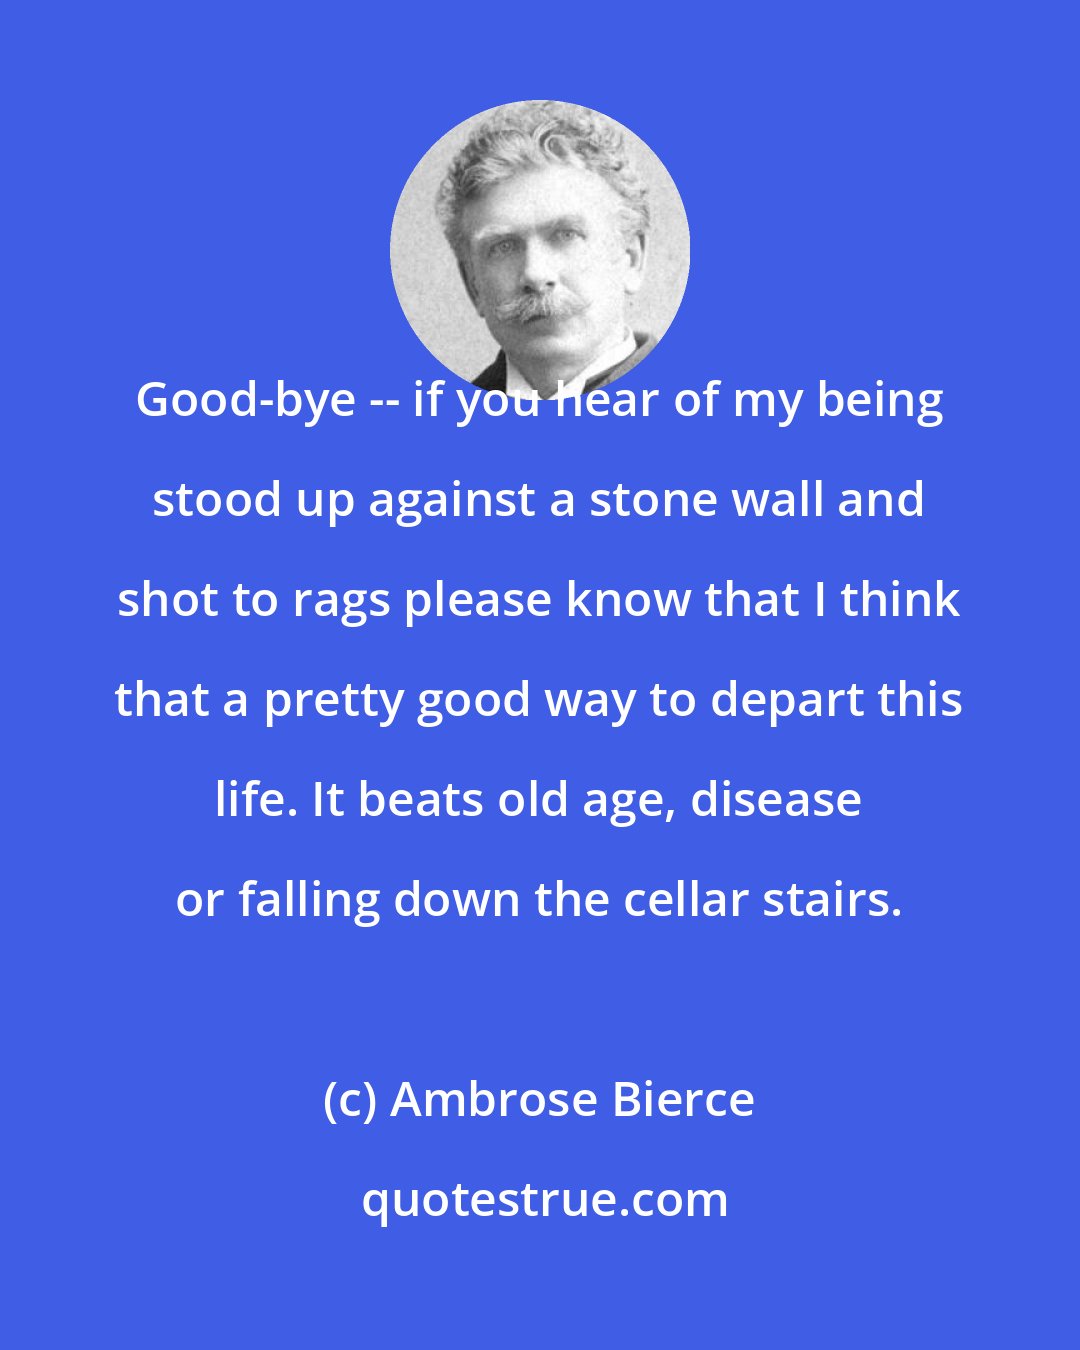 Ambrose Bierce: Good-bye -- if you hear of my being stood up against a stone wall and shot to rags please know that I think that a pretty good way to depart this life. It beats old age, disease or falling down the cellar stairs.